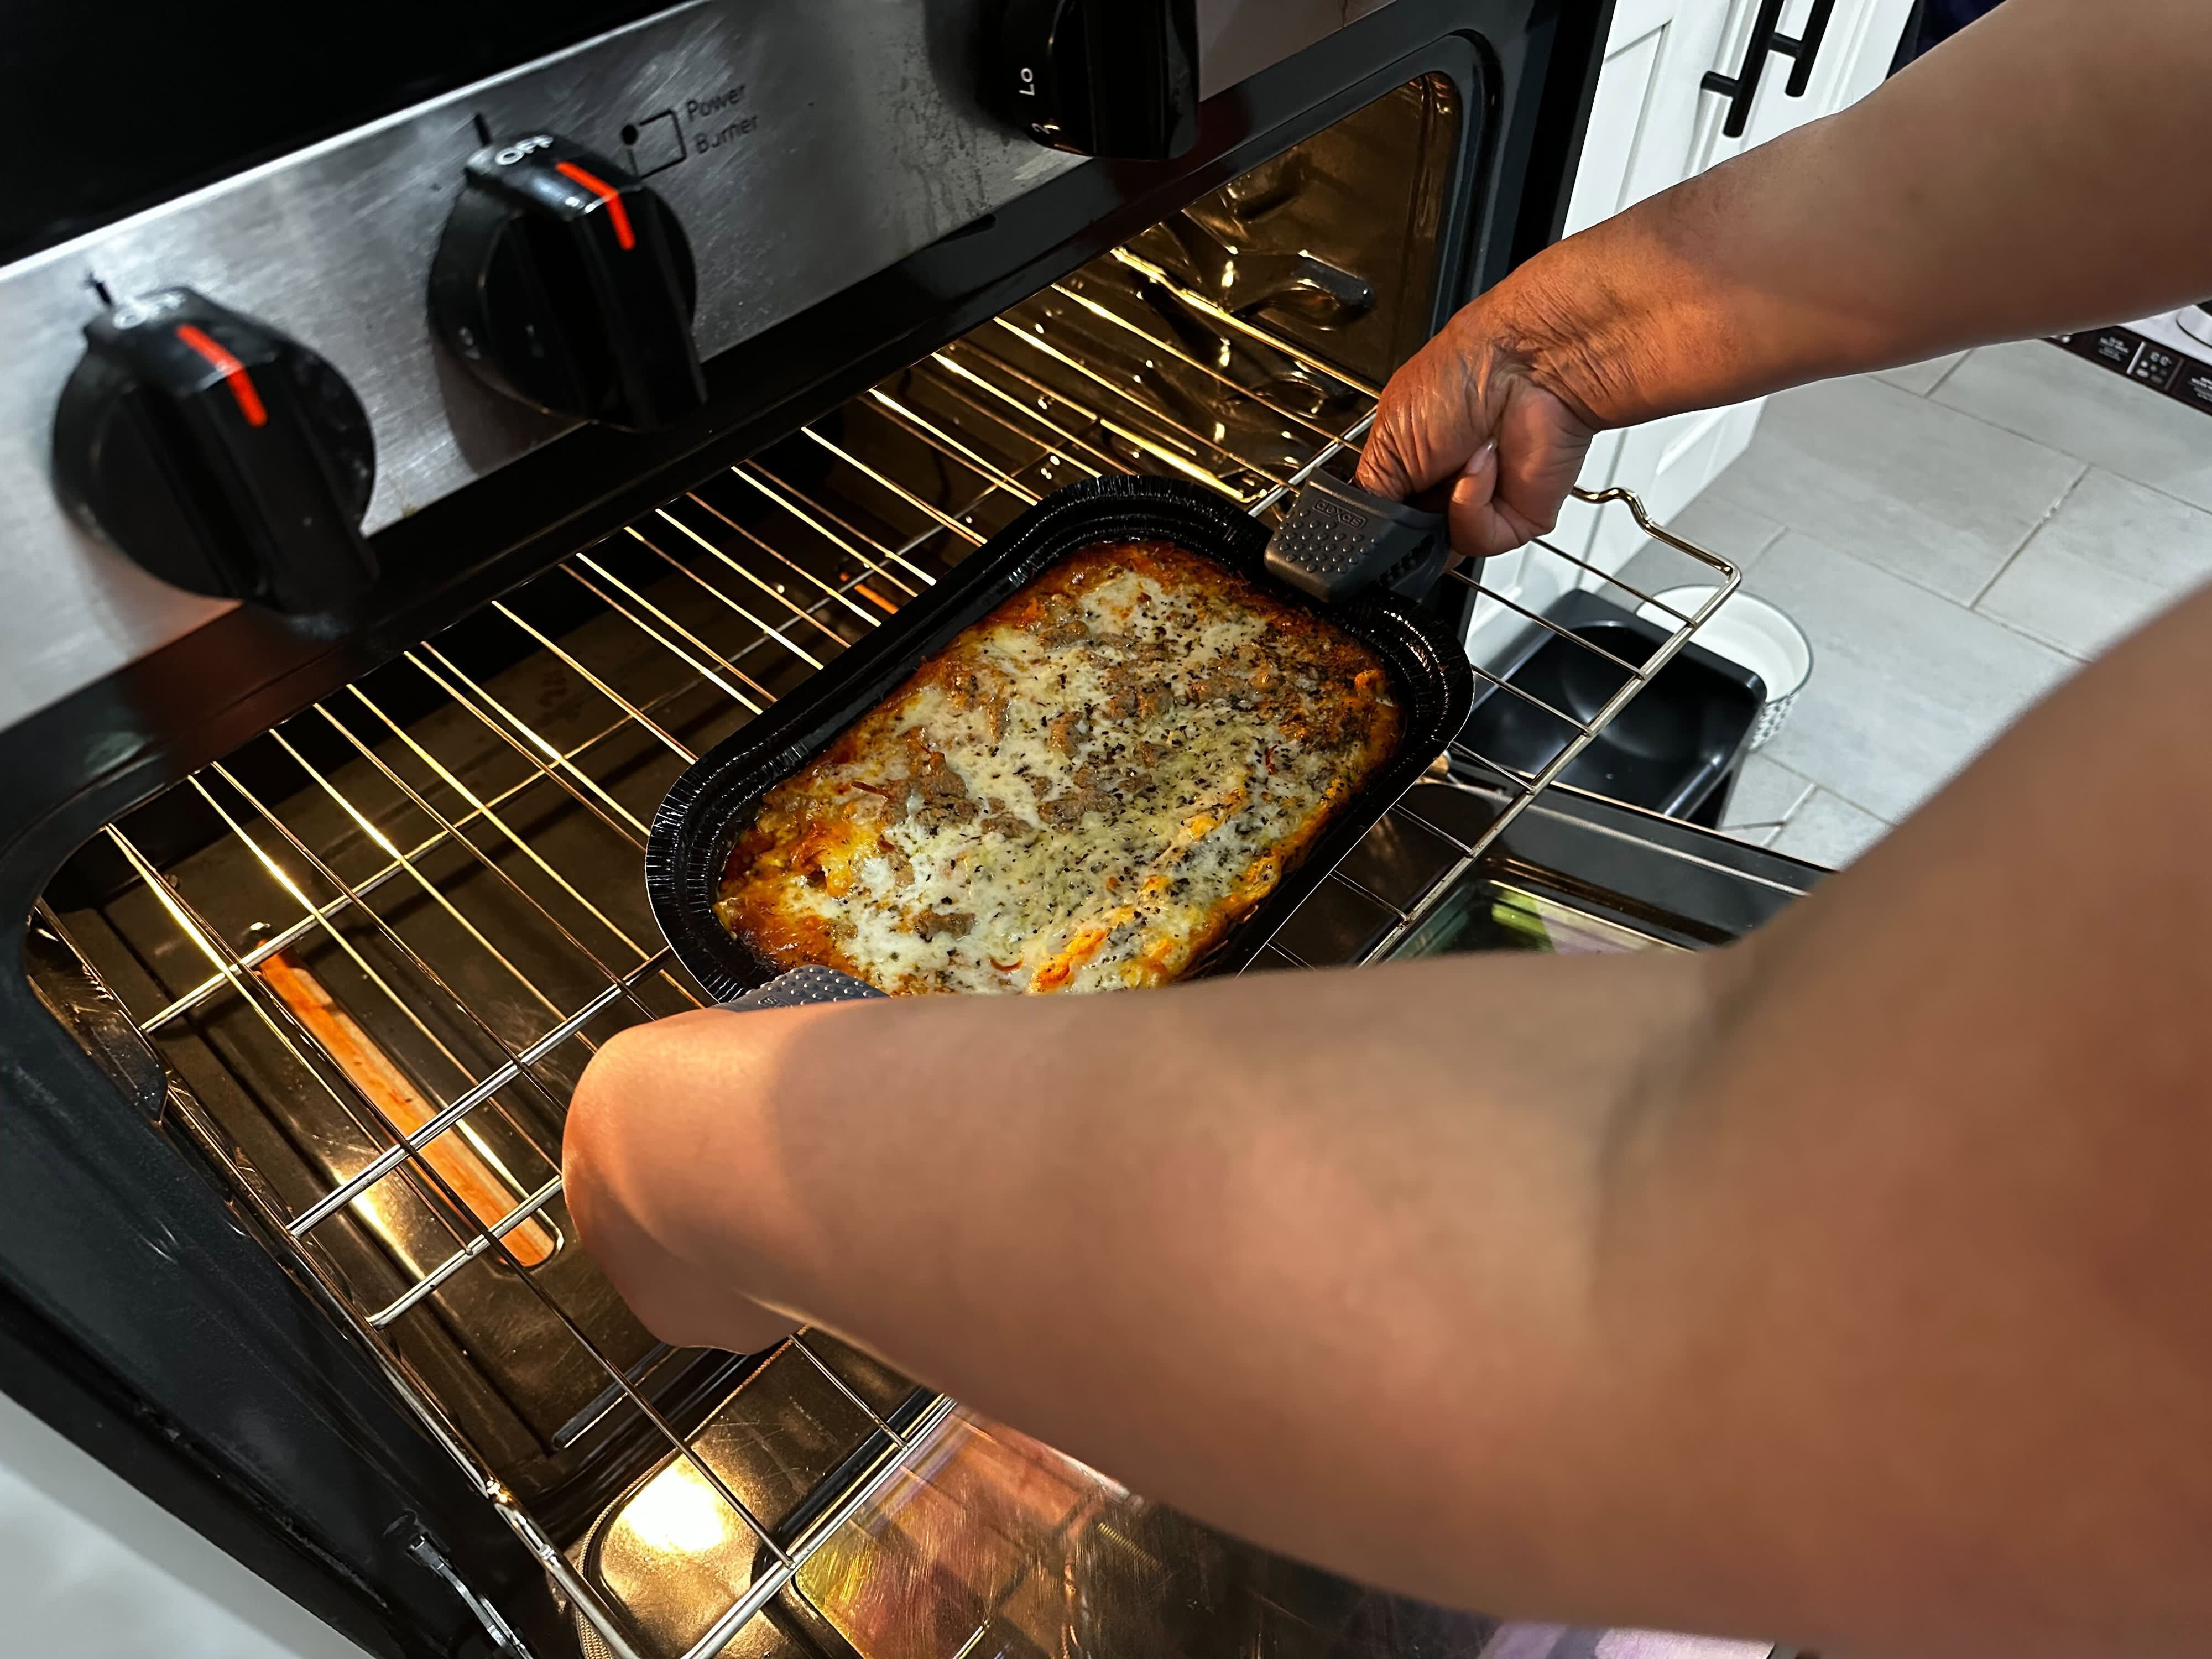 Silicone Oven Mitts: The Best Oven Mitts?